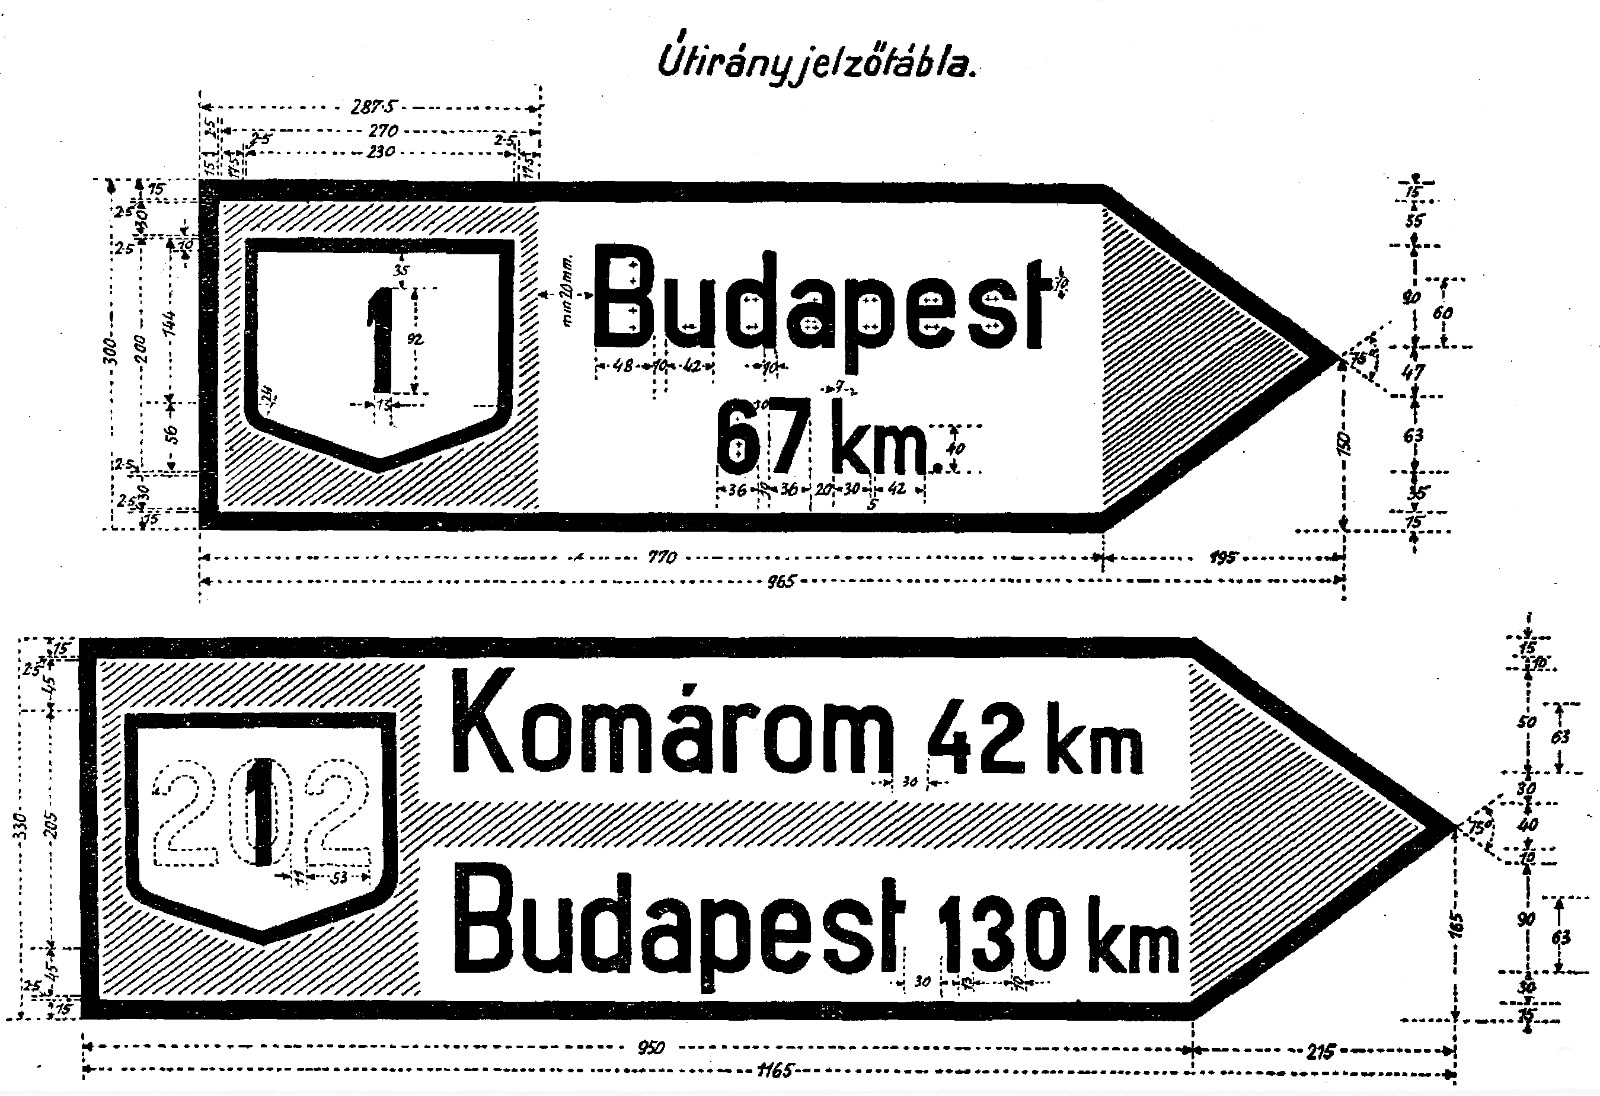 Highway direction sign templates showing detailed measurements and angles of the signs. There are two signs, the first one points to the right indicating that Budapest is 67 kilometers away on Road 1. The other sign also points to the right, indicating that Komárom is 42 kilometers away on Road 1, while Budapest is 130 kilometers away on the same road. There is a dotted outline for "202" in the road number field, showing that even a three-digit number would fit here.